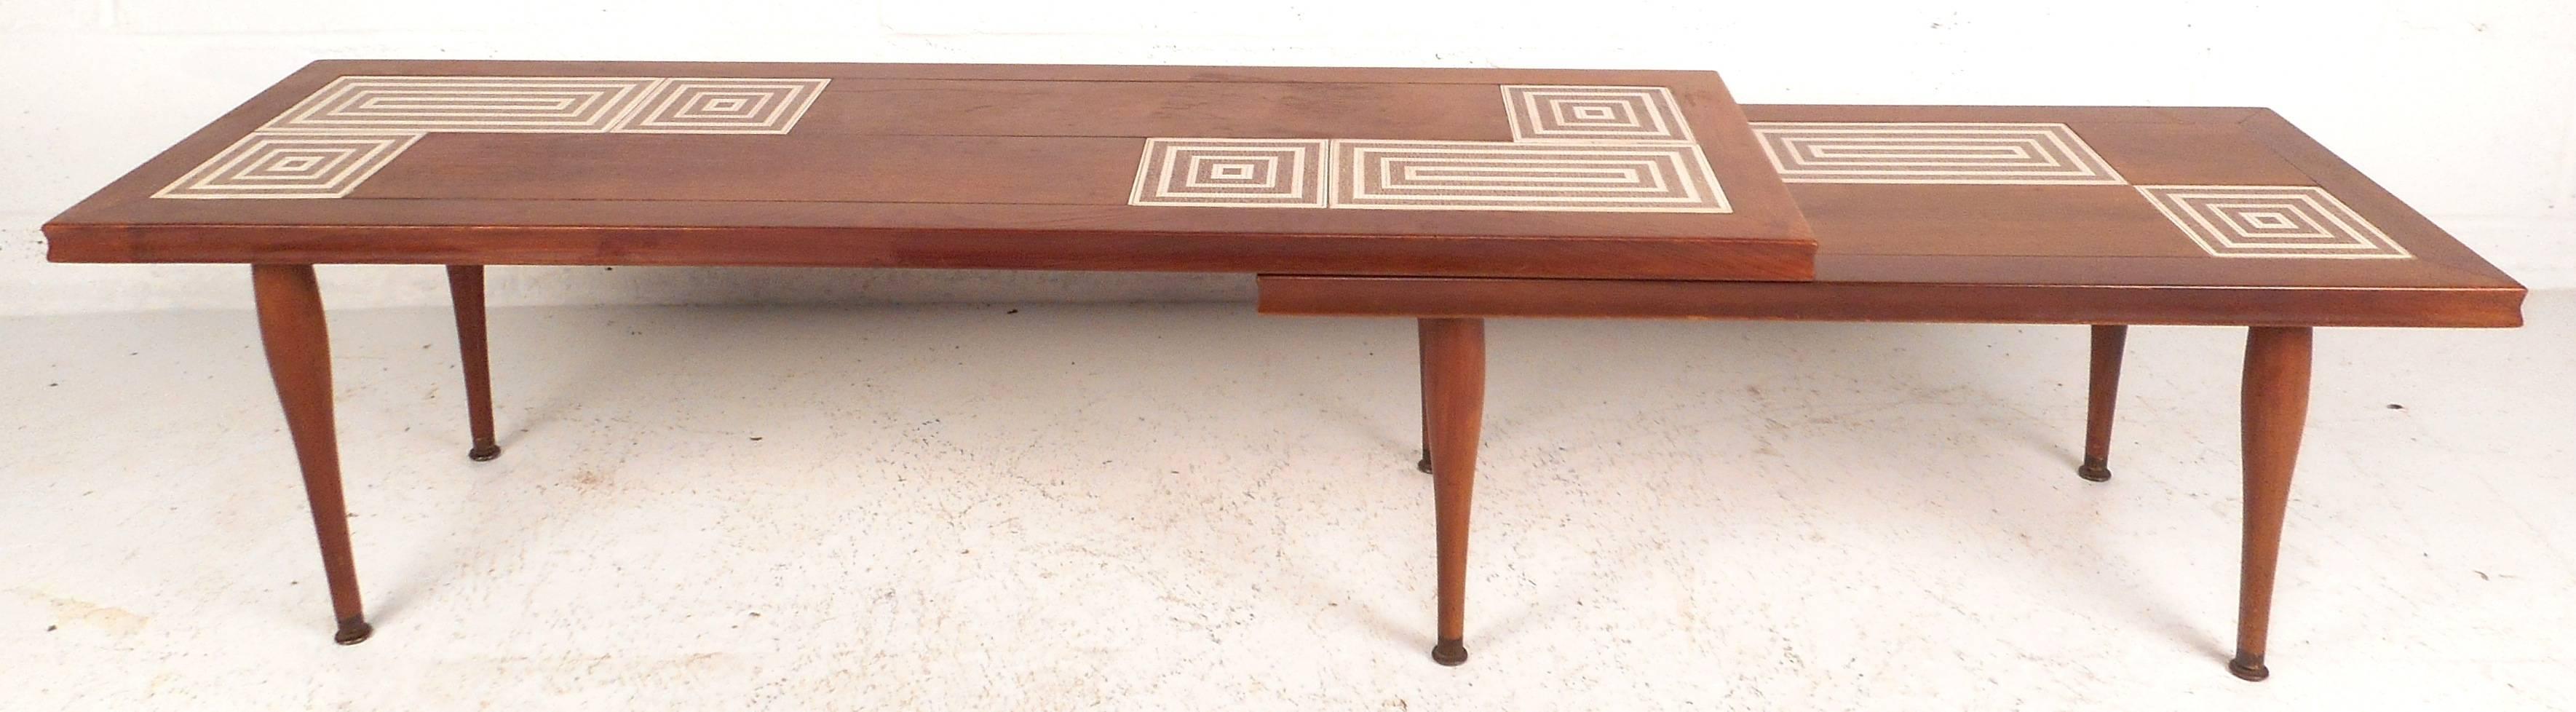 Mid-Century Modern Tile-Tip Pivot Coffee Table In Good Condition For Sale In Brooklyn, NY